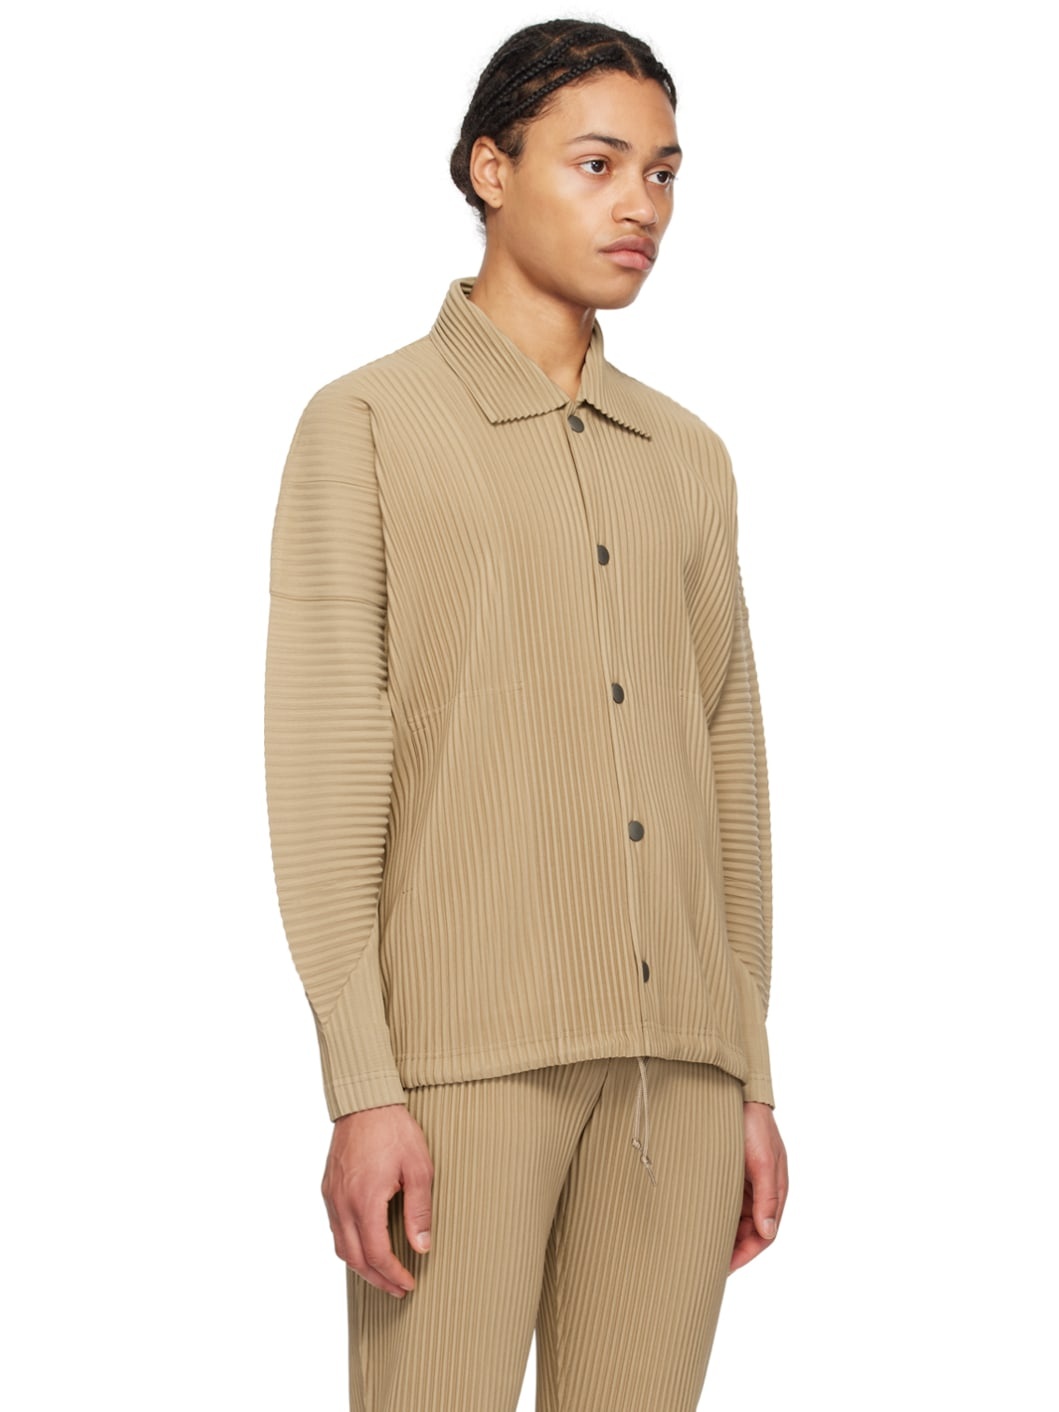 Beige Monthly Color February Jacket - 2